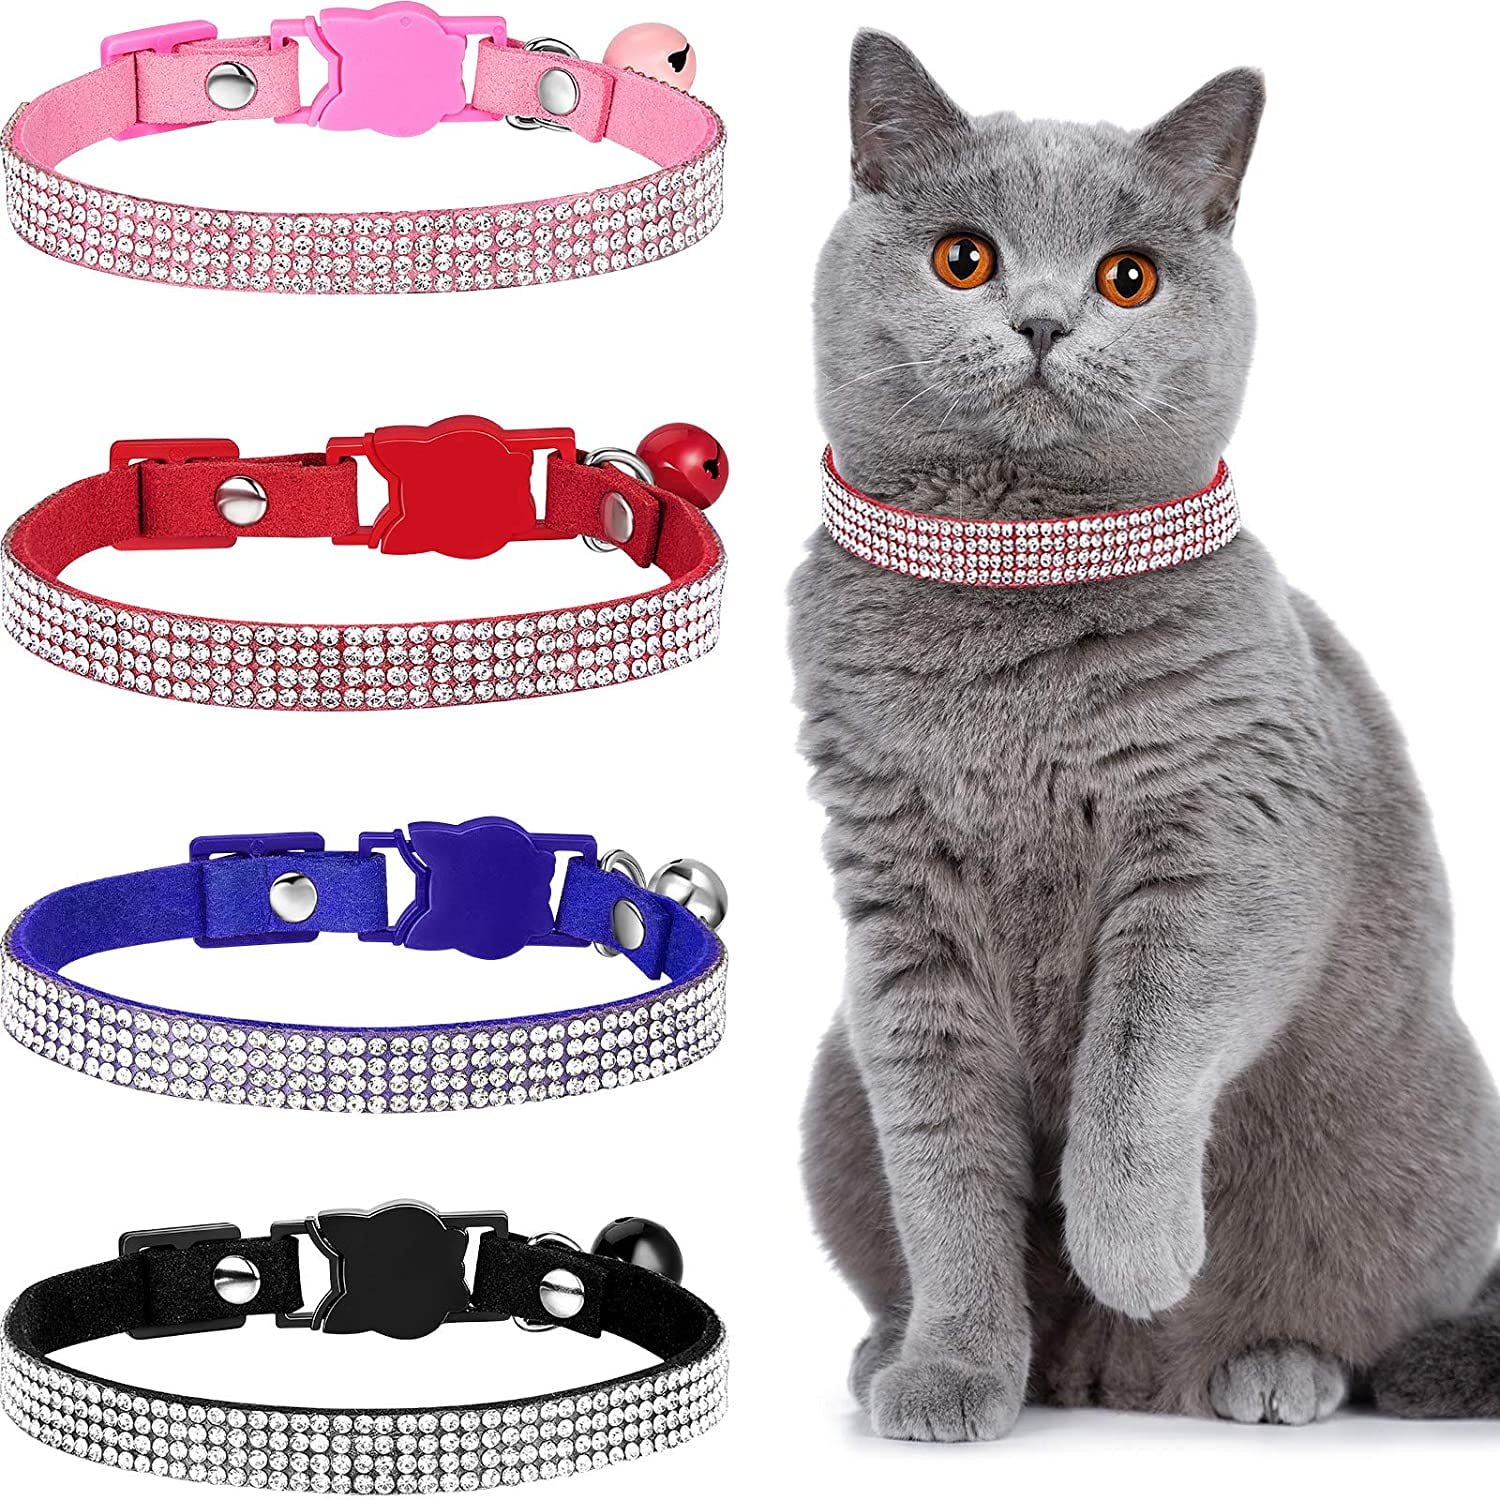 Frienda 4 Pieces Christmas Cat Collars with Bell Adjustable Breakaway Cat Collars Holiday Kitten Decoration for Christmas Party Cat Accessories